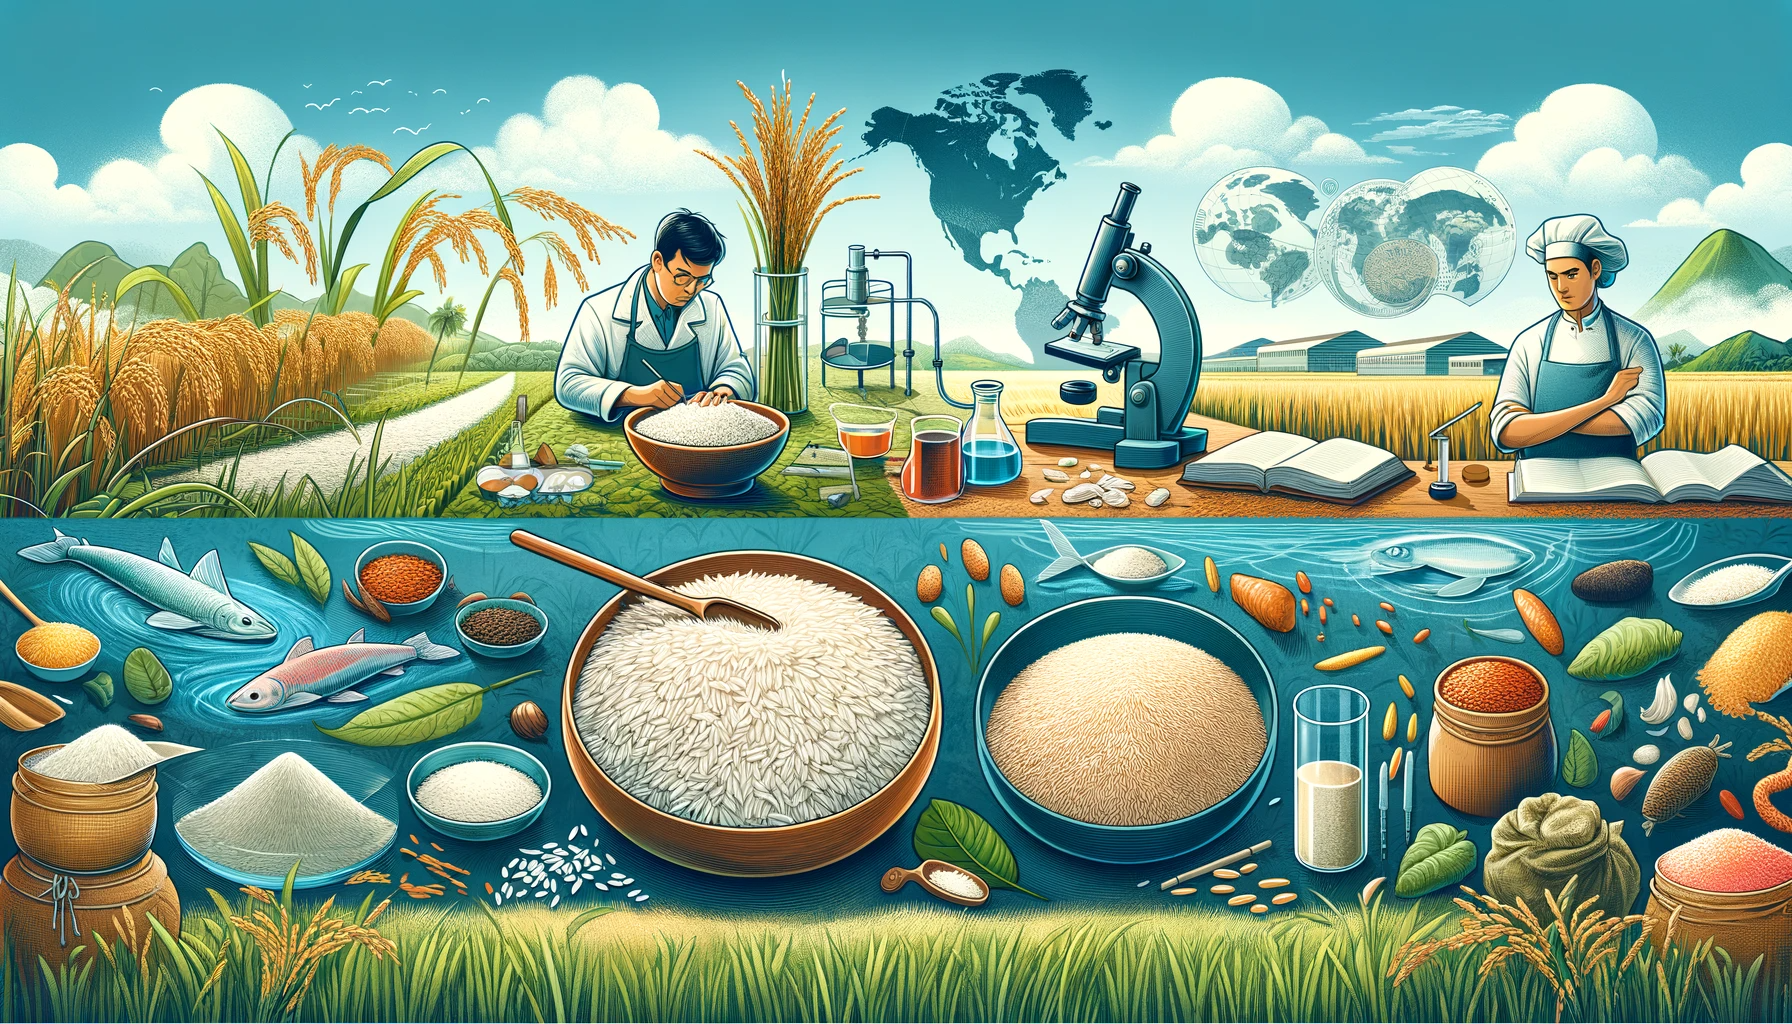 An illustrative banner showing the journey of rice from field to lab to kitchen, with a scientist, a chef, and various rice grains and dishes, set against a global agricultural backdrop.